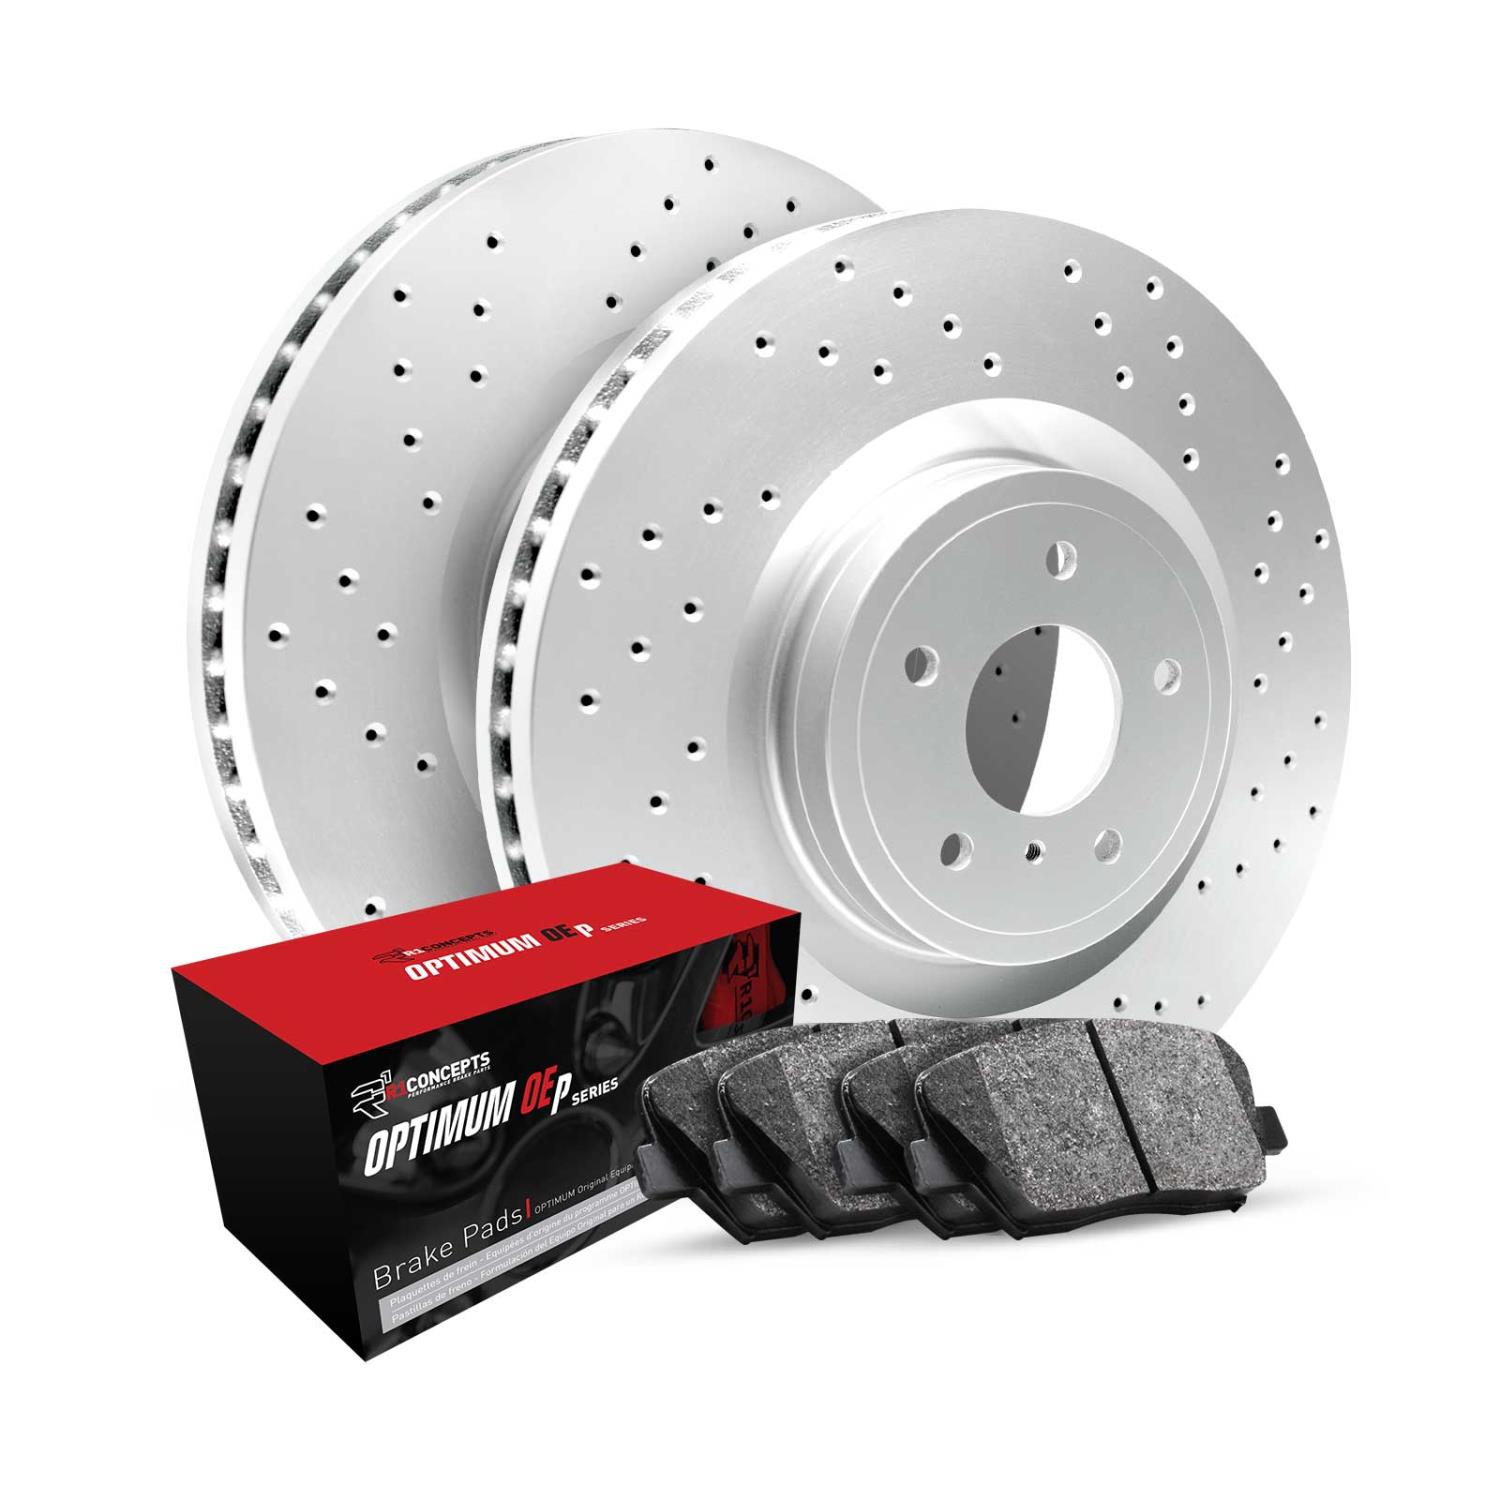 GEO-Carbon Drilled Brake Rotor Set w/Optimum OE Pads, 1992-2004 Fits Multiple Makes/Models, Position: Rear